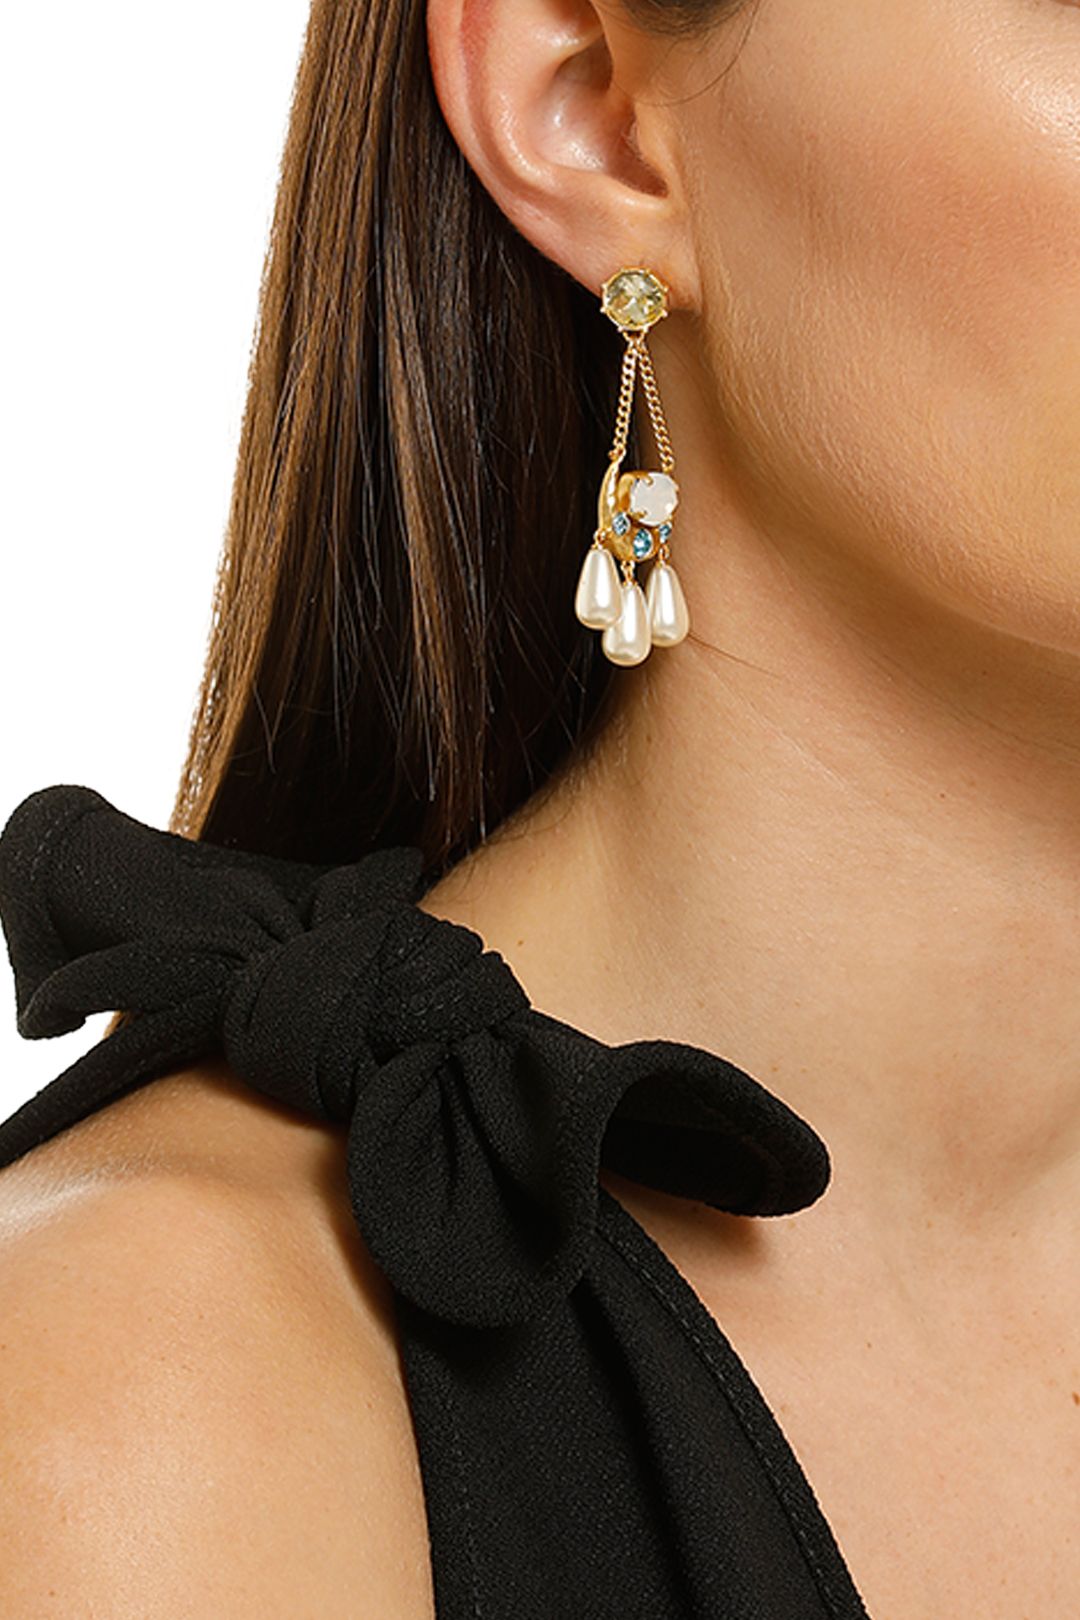 Peter-Lang-Creciente-Earring-Product